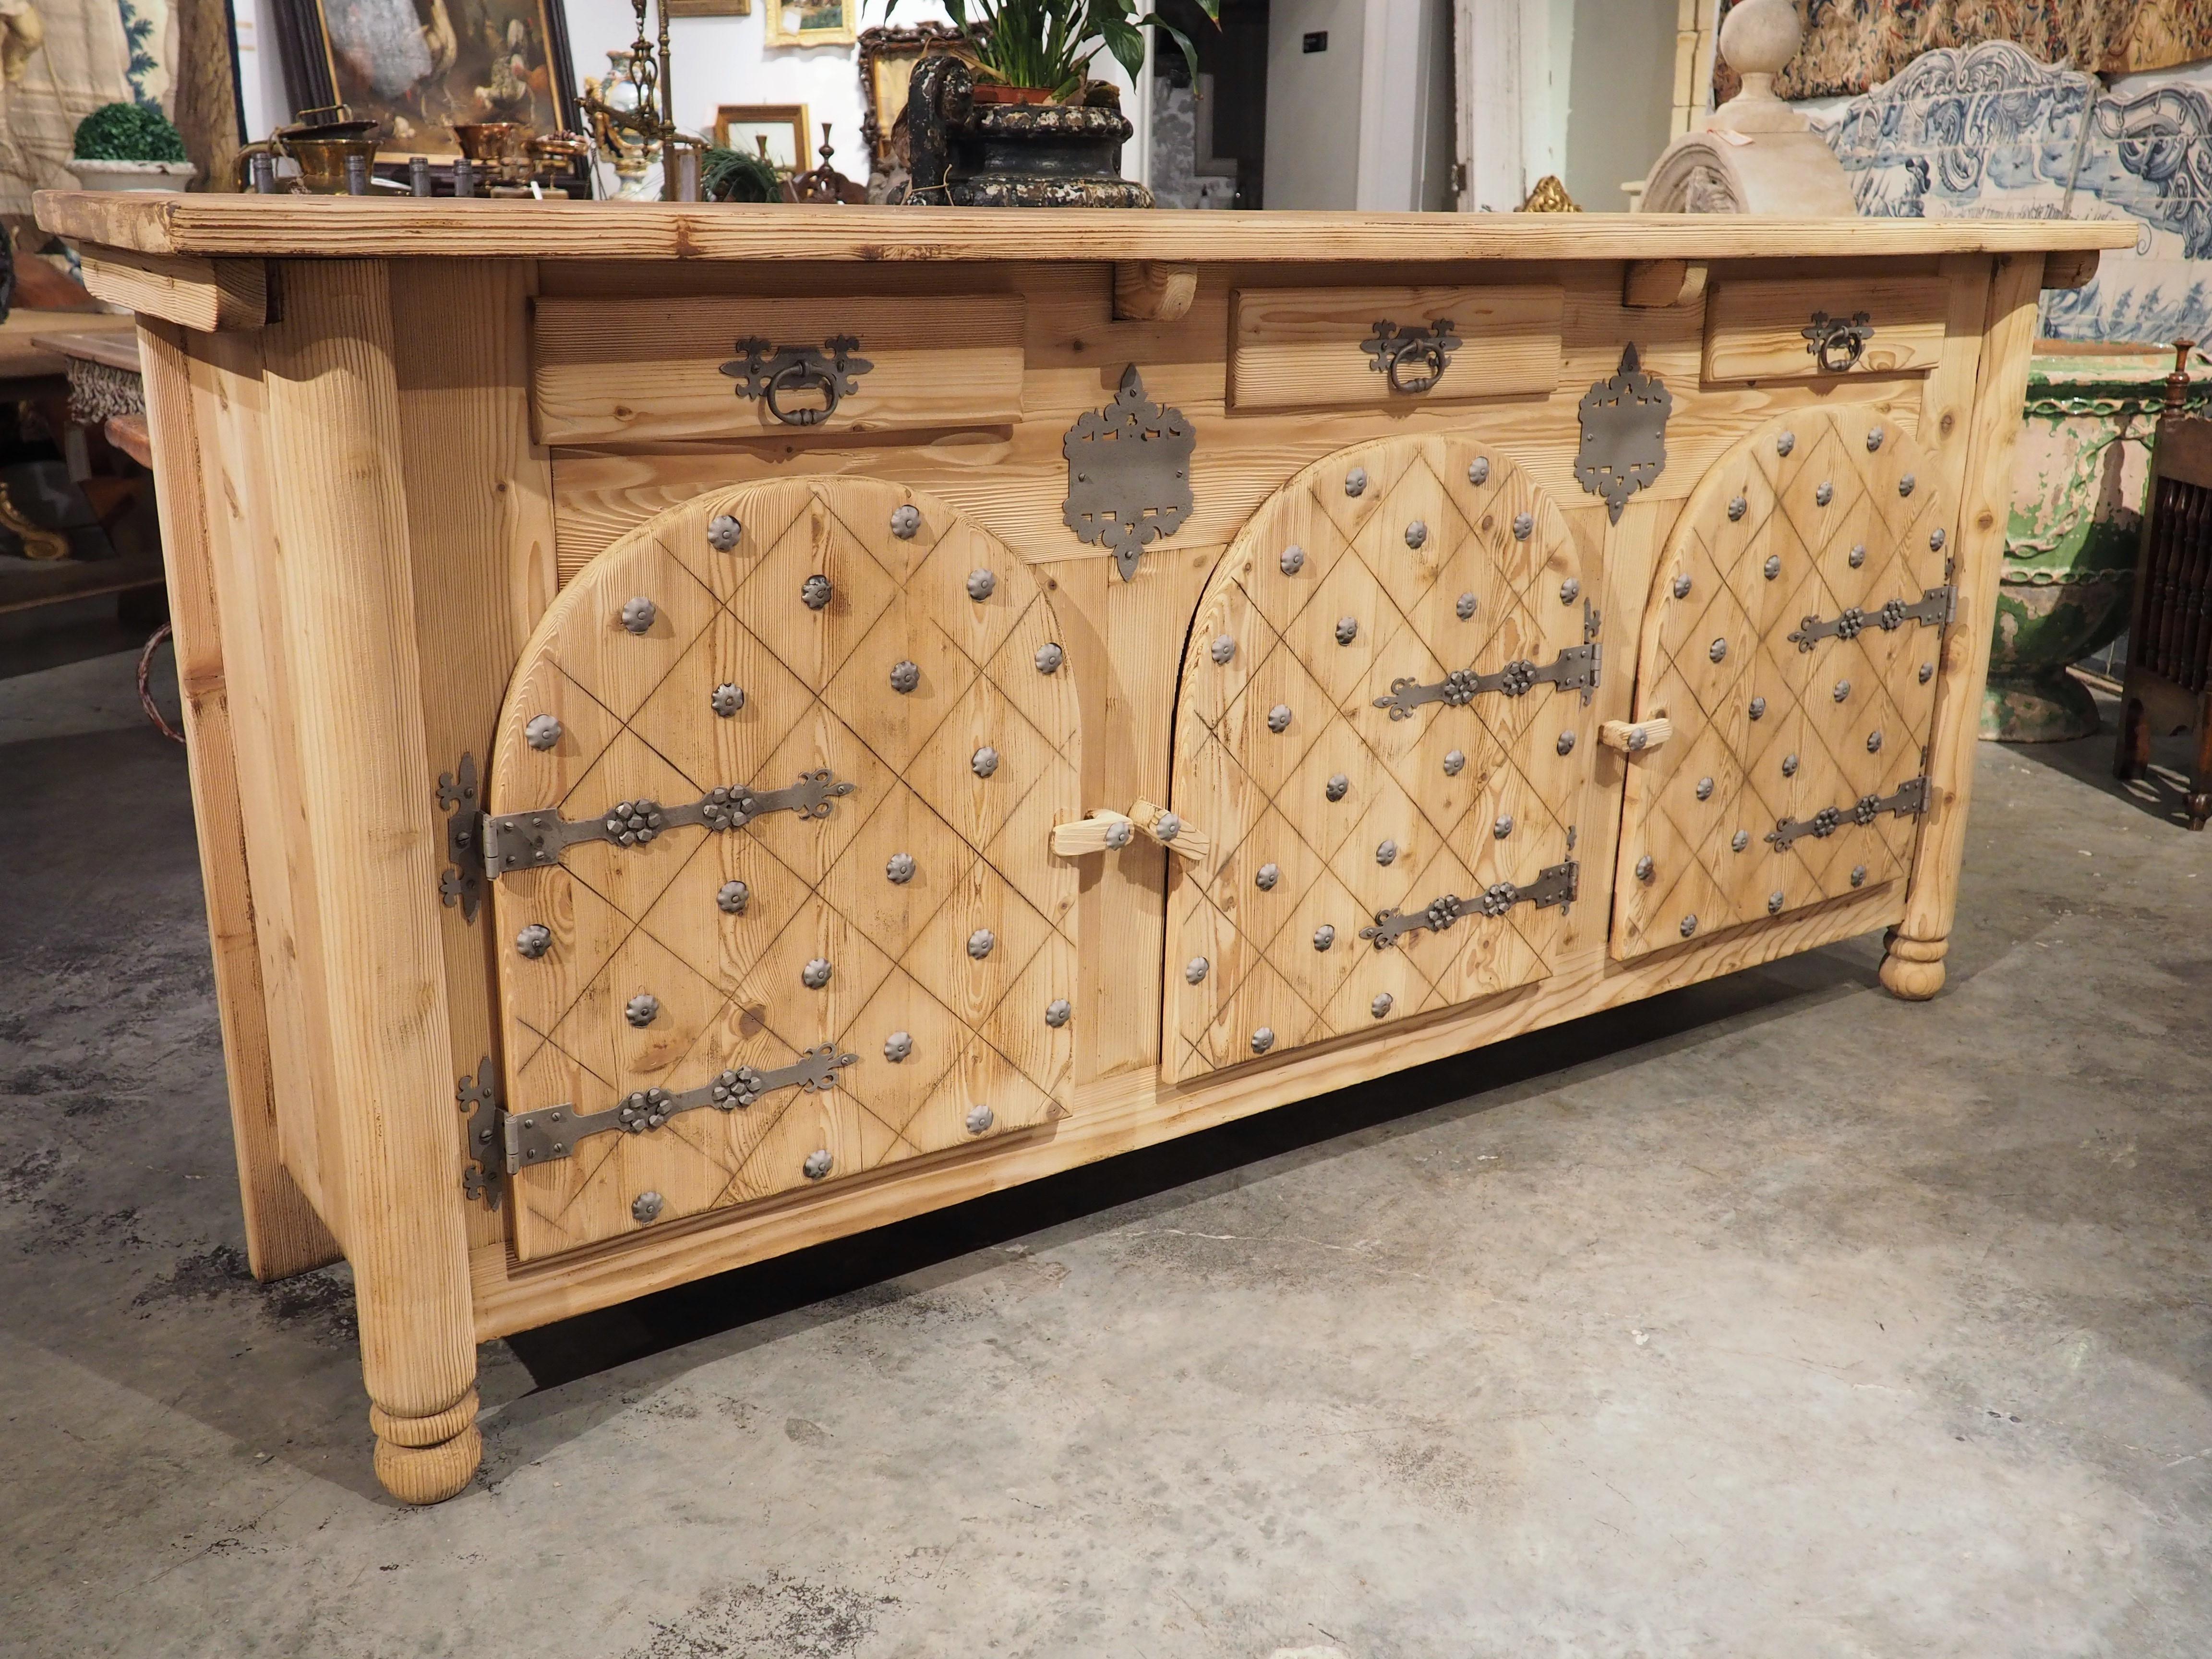 Spanish Stripped Pine Credenza from Spain with Arched Doors and Decorative Nailheads